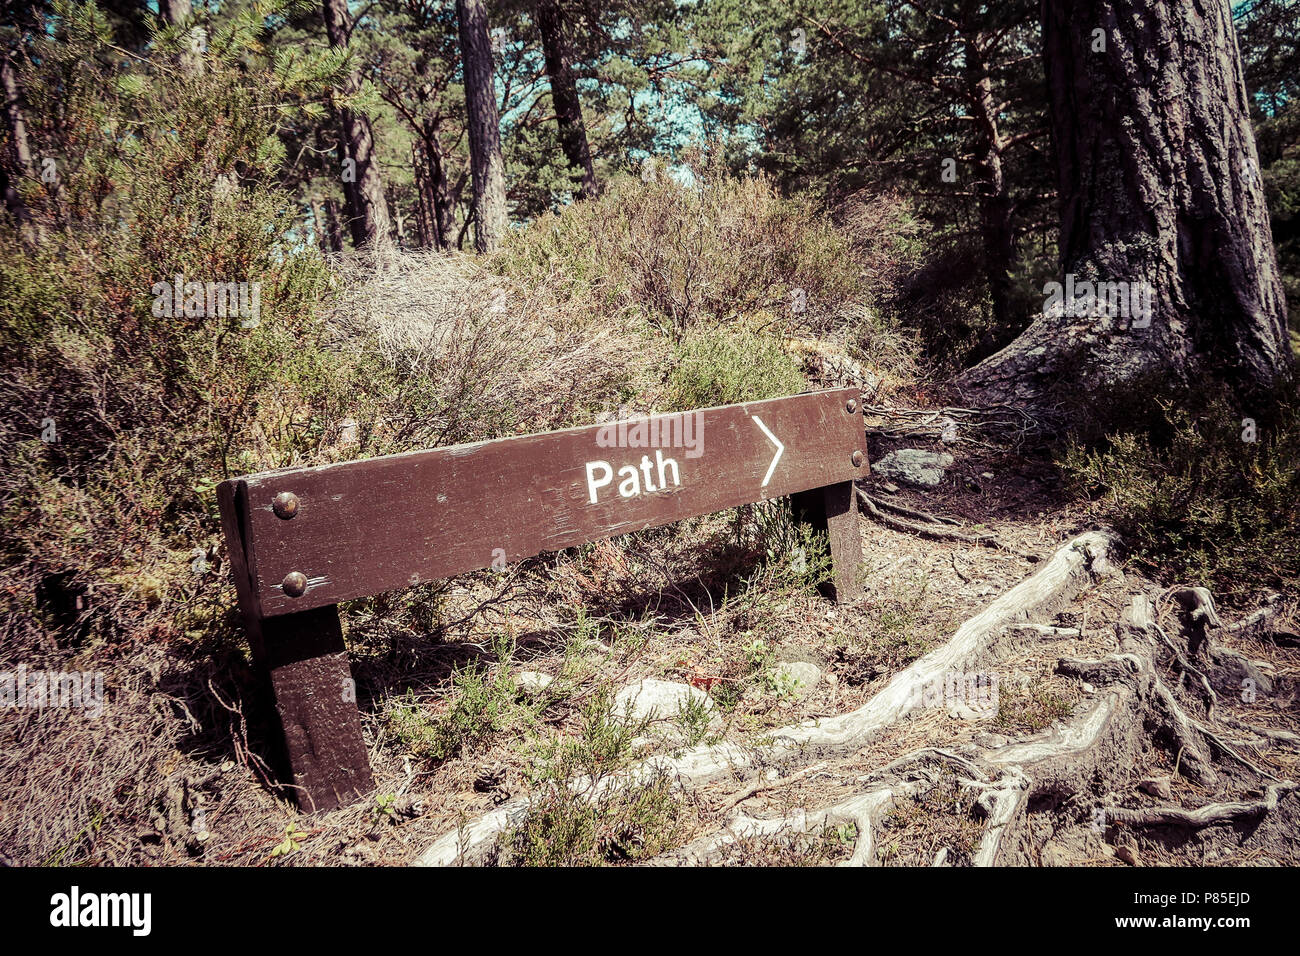 Wooden pathway sign on footpath Stock Photo